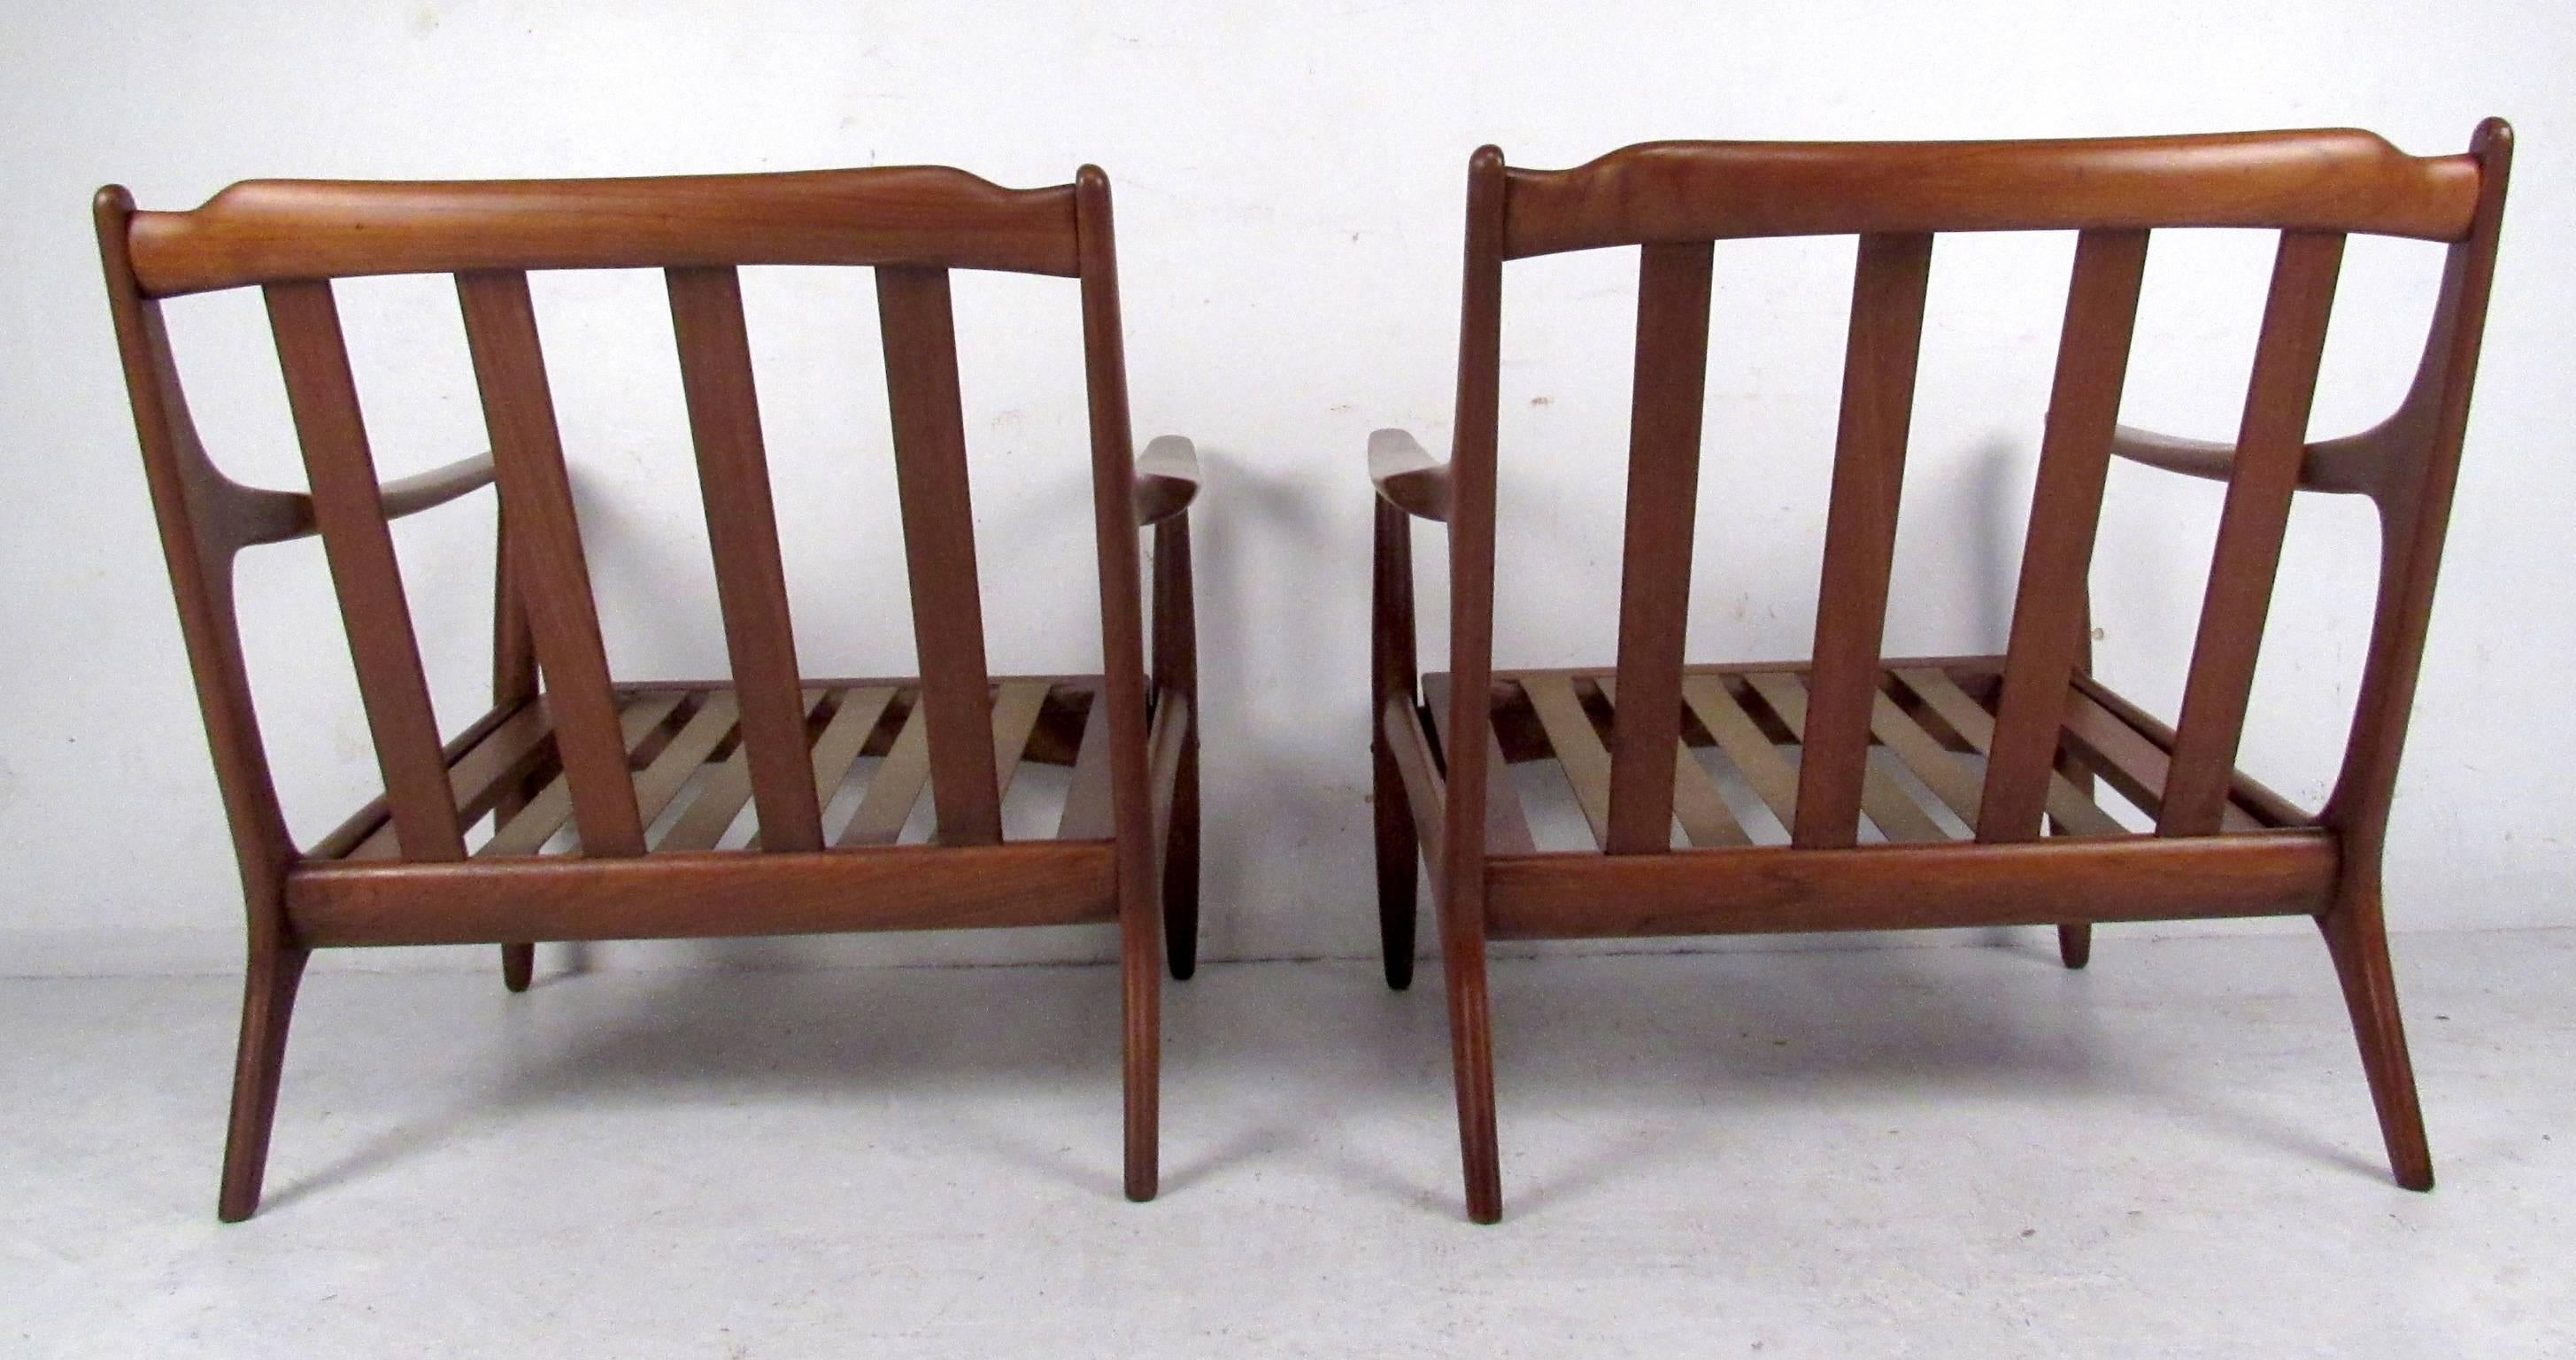 Two vintage-modern lounge chairs featuring sculpted body with rubber straps along seat, made in Denmark.

Please confirm item location NY or NJ with dealer.